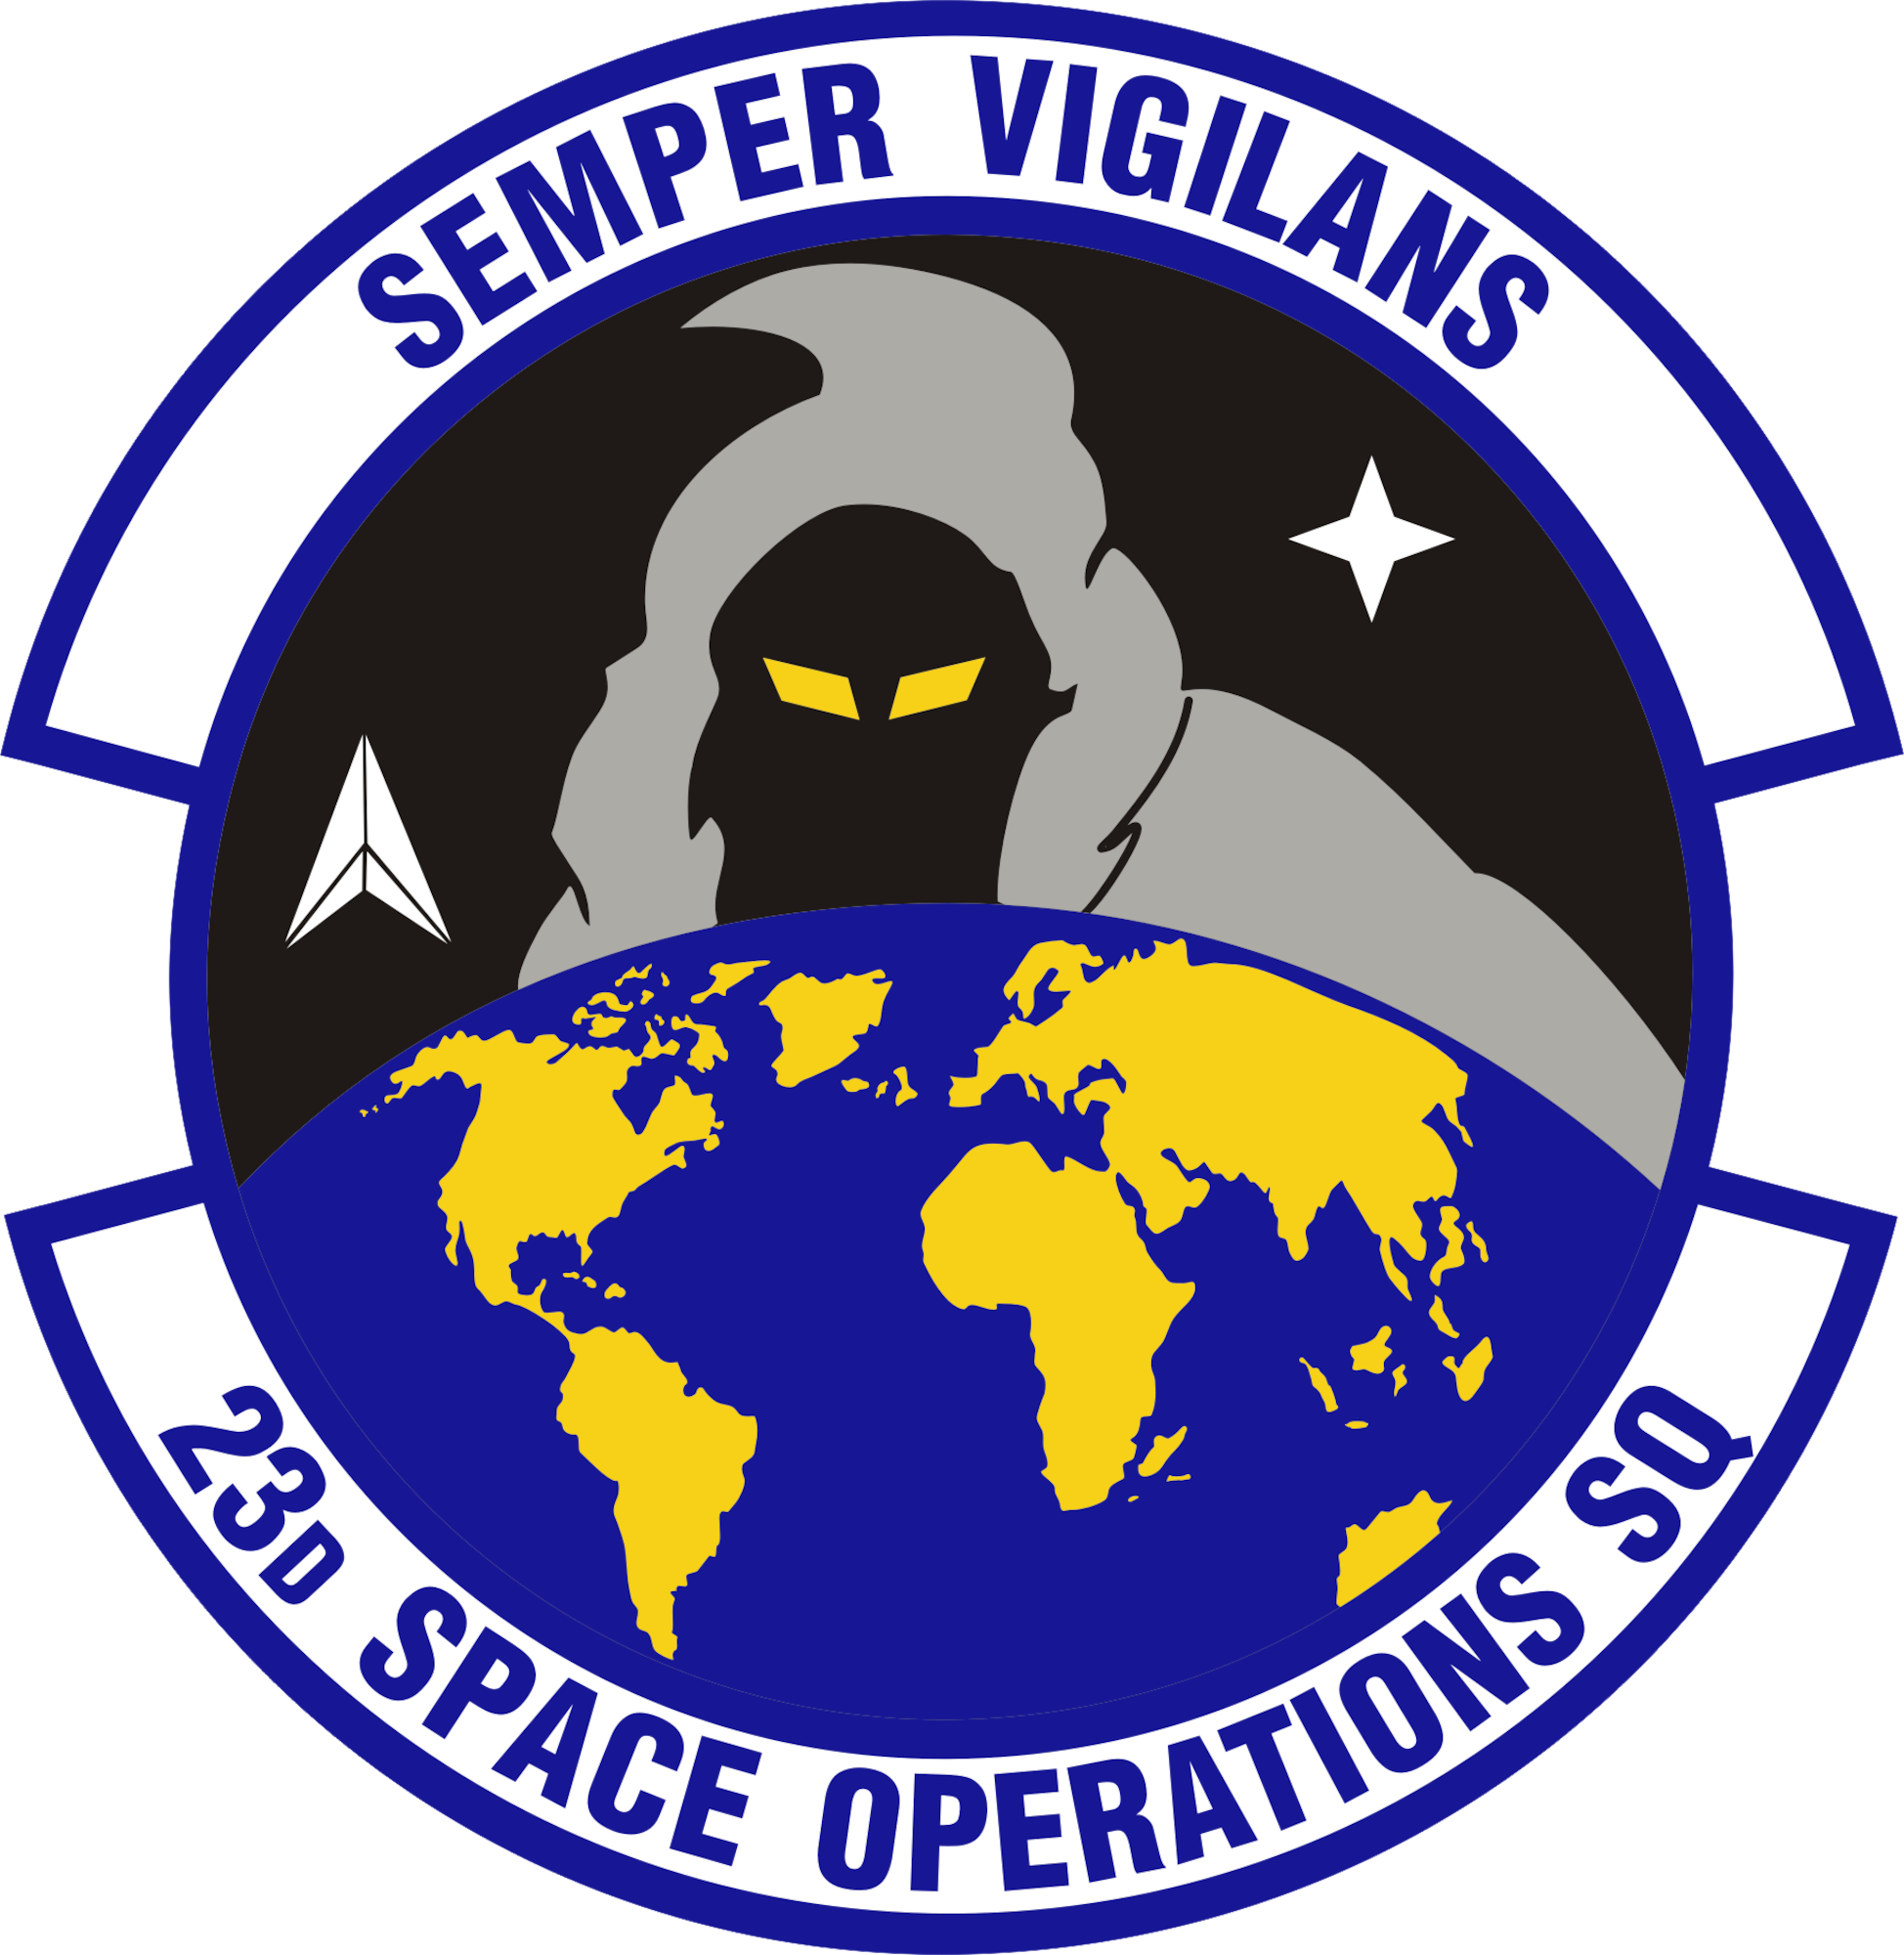 23rd Space Operations Squadron